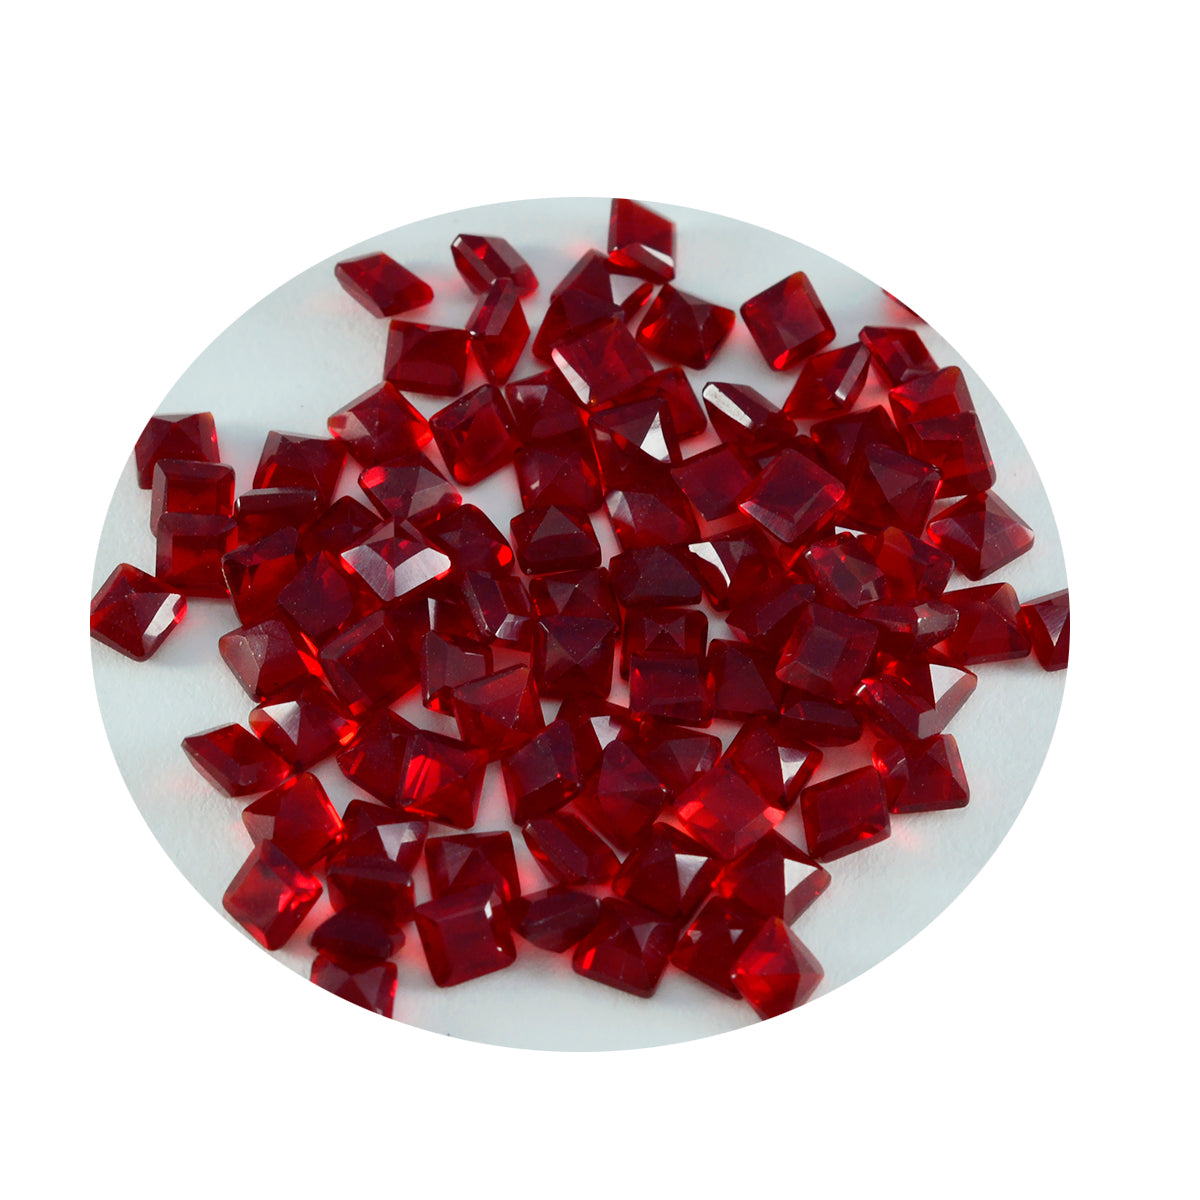 Riyogems 1PC Red Ruby CZ Faceted 4x4 mm Square Shape lovely Quality Loose Gemstone